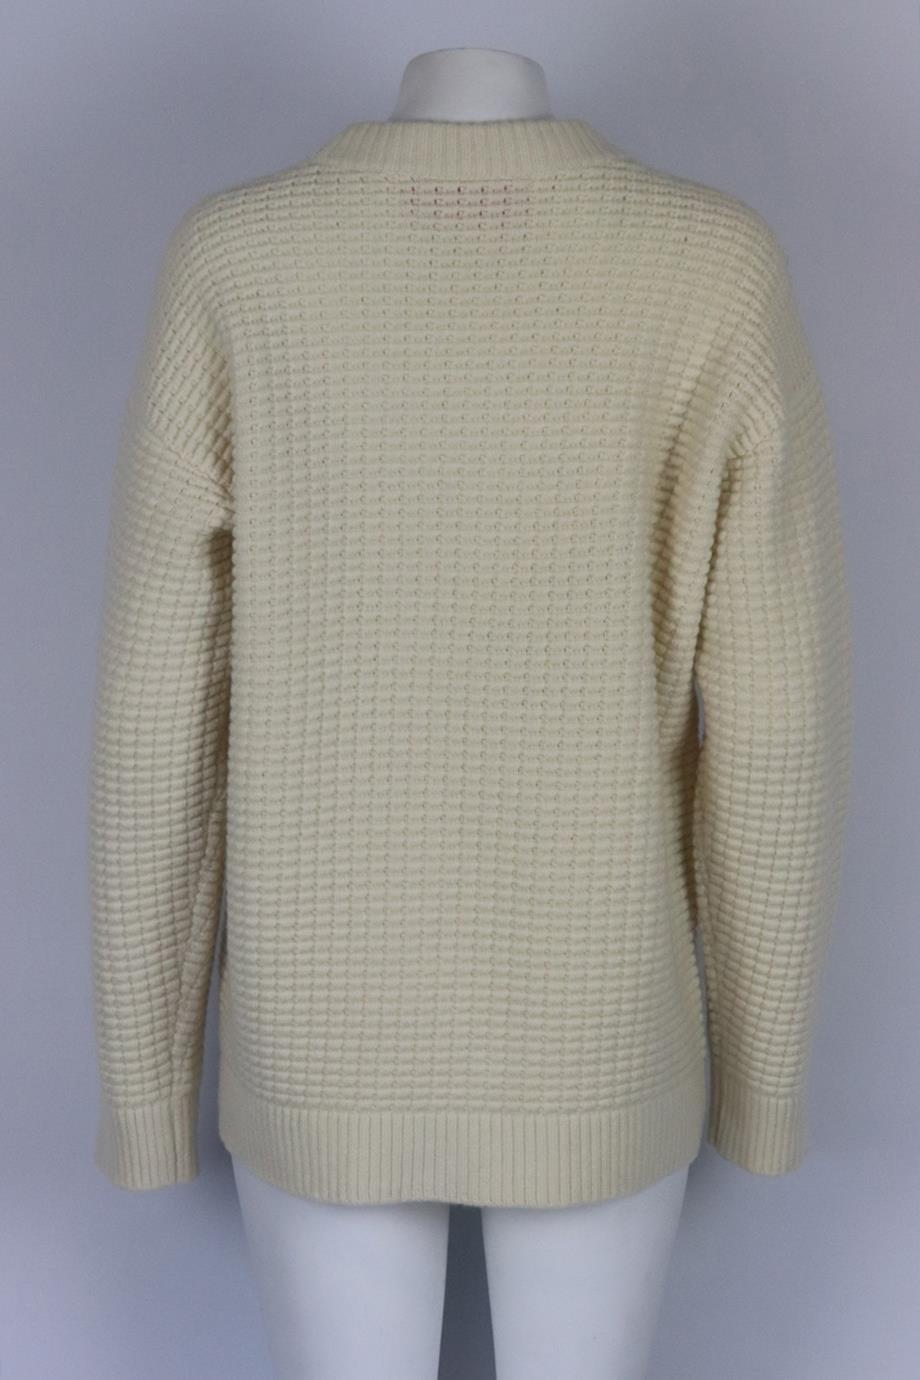 The Elder Statesman Embroidered Waffle Knit Cashmere Sweater Xsmall In Excellent Condition In London, GB